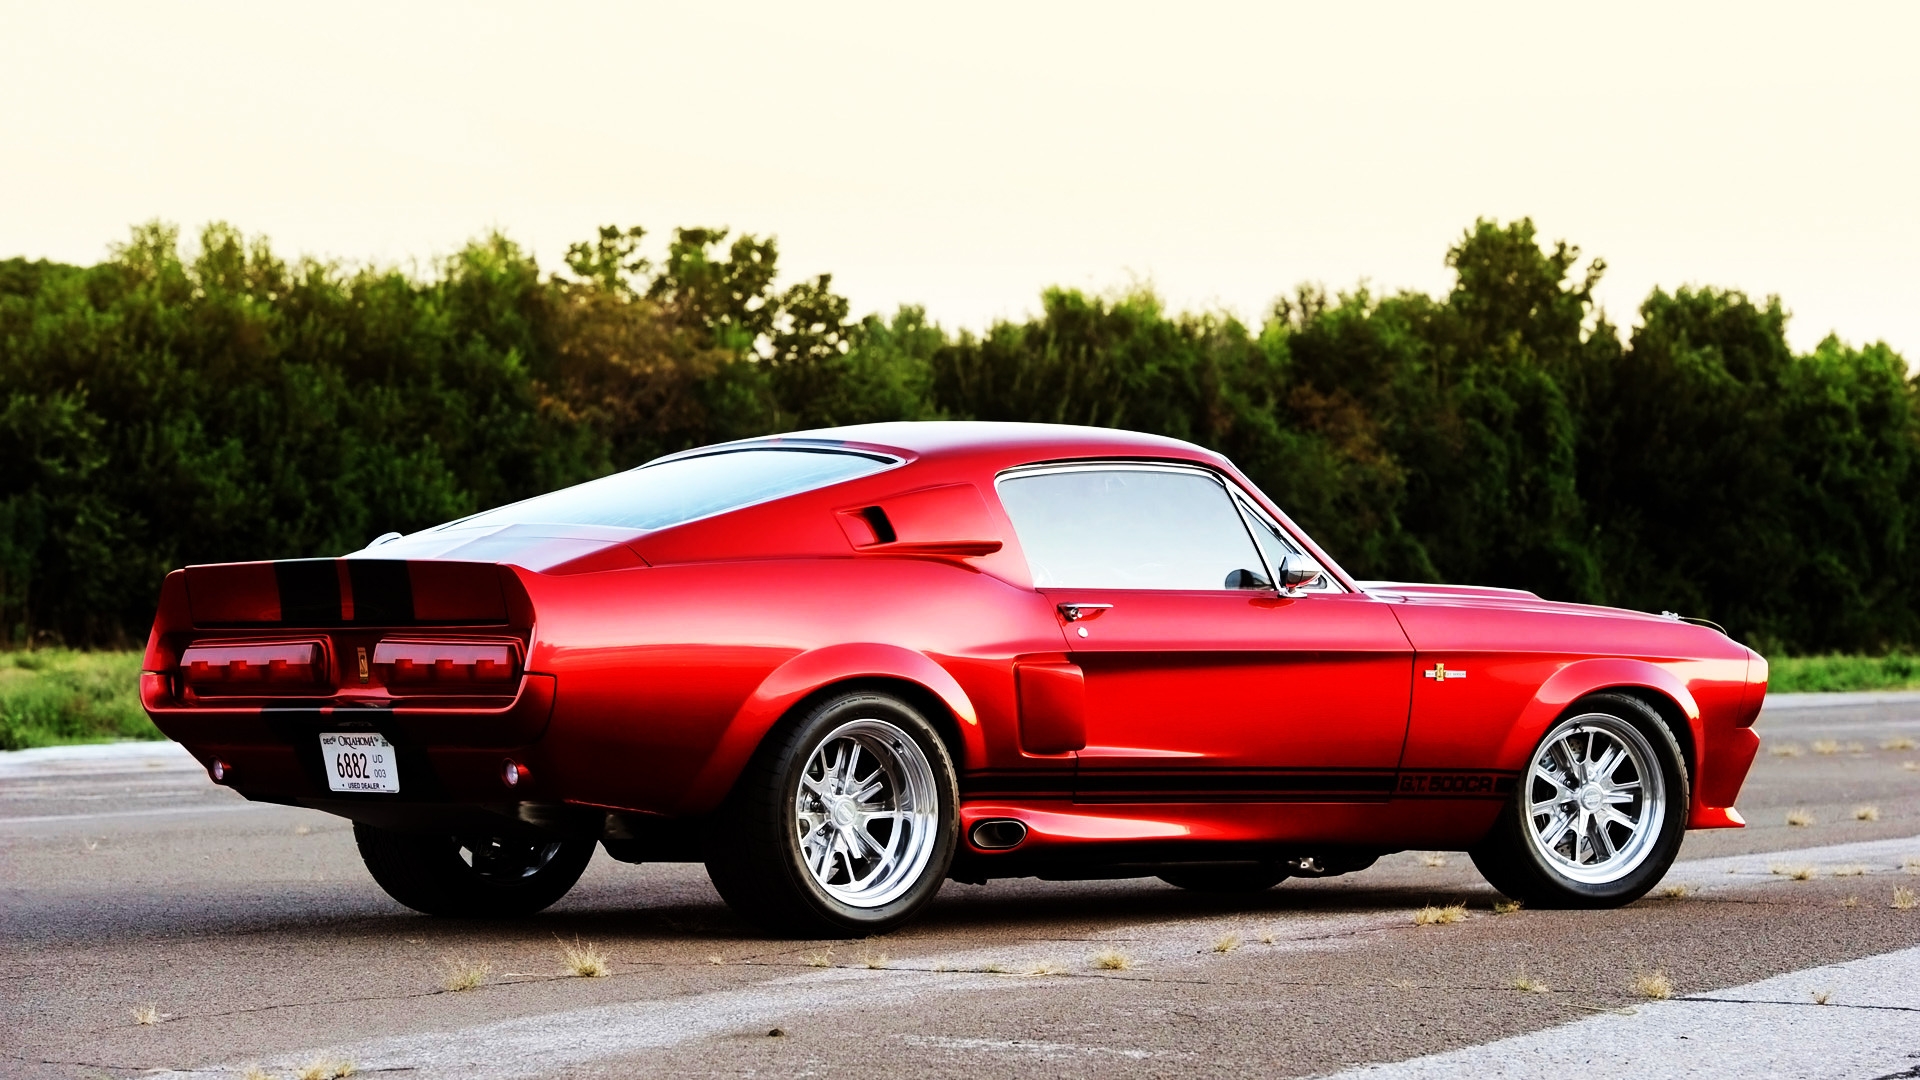 2011 Shelby GT500CR Rear for 1920 x 1080 HDTV 1080p resolution